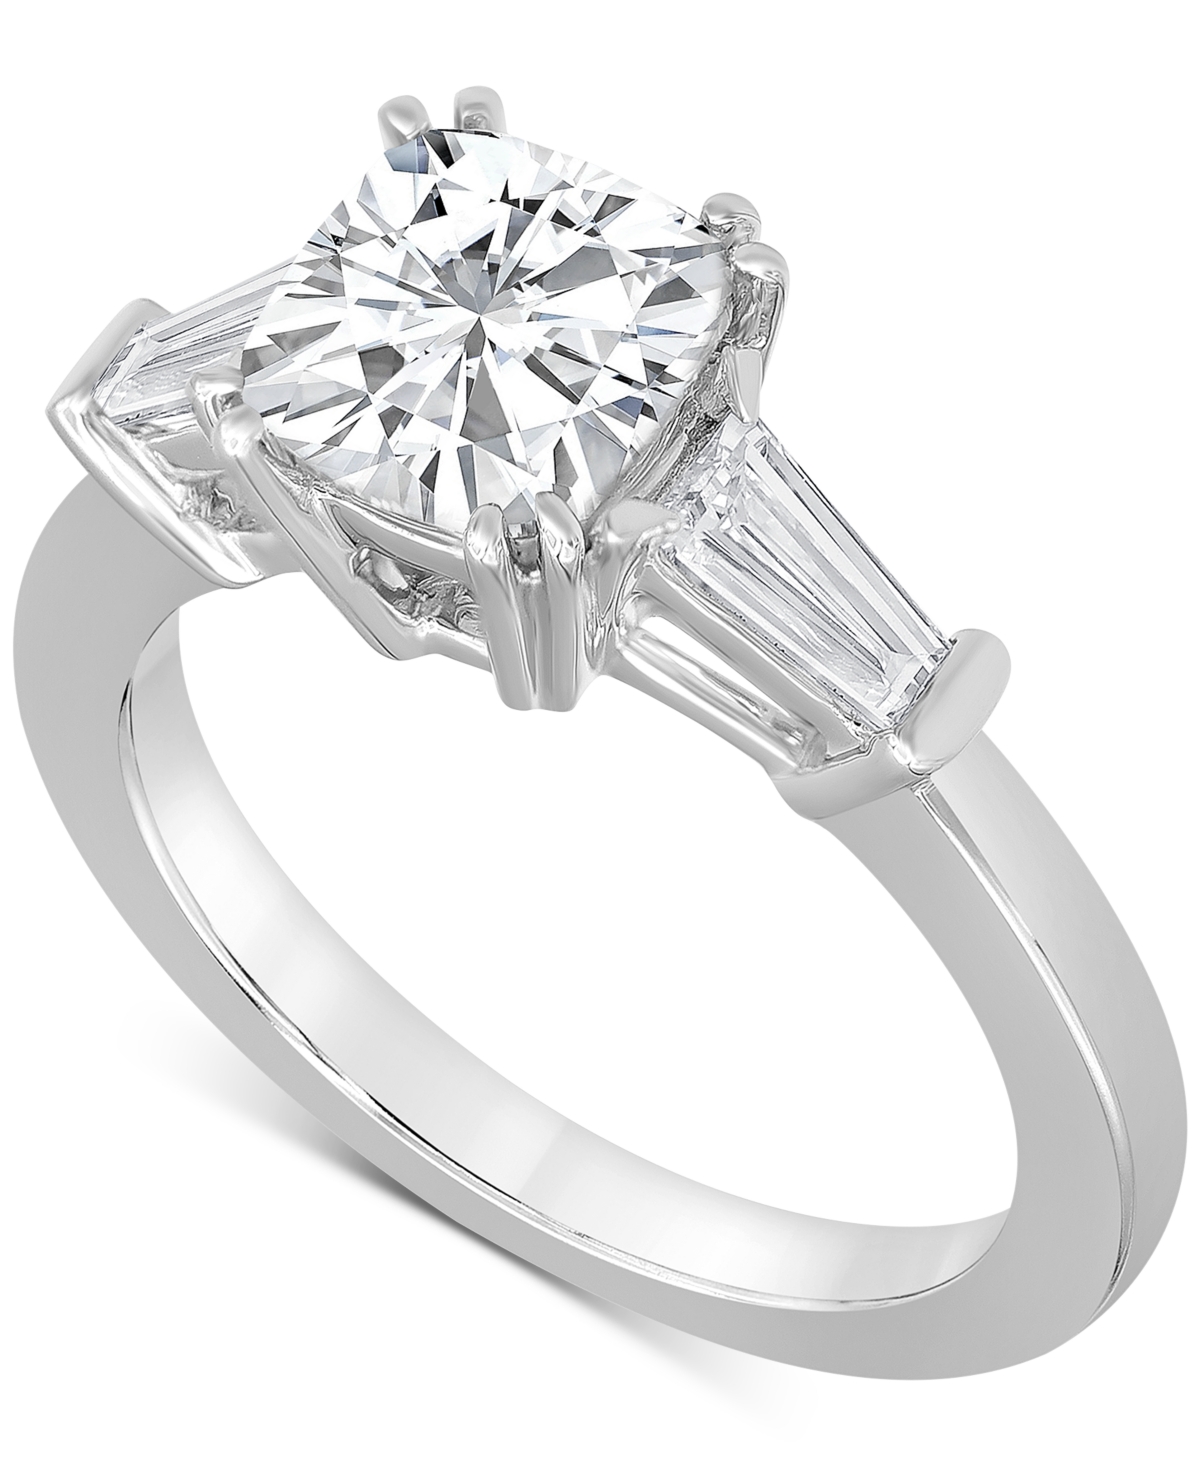 Certified Lab Grown Diamond Engagement Ring (2-1/2 ct. t.w.) in 14k Gold - White Gold